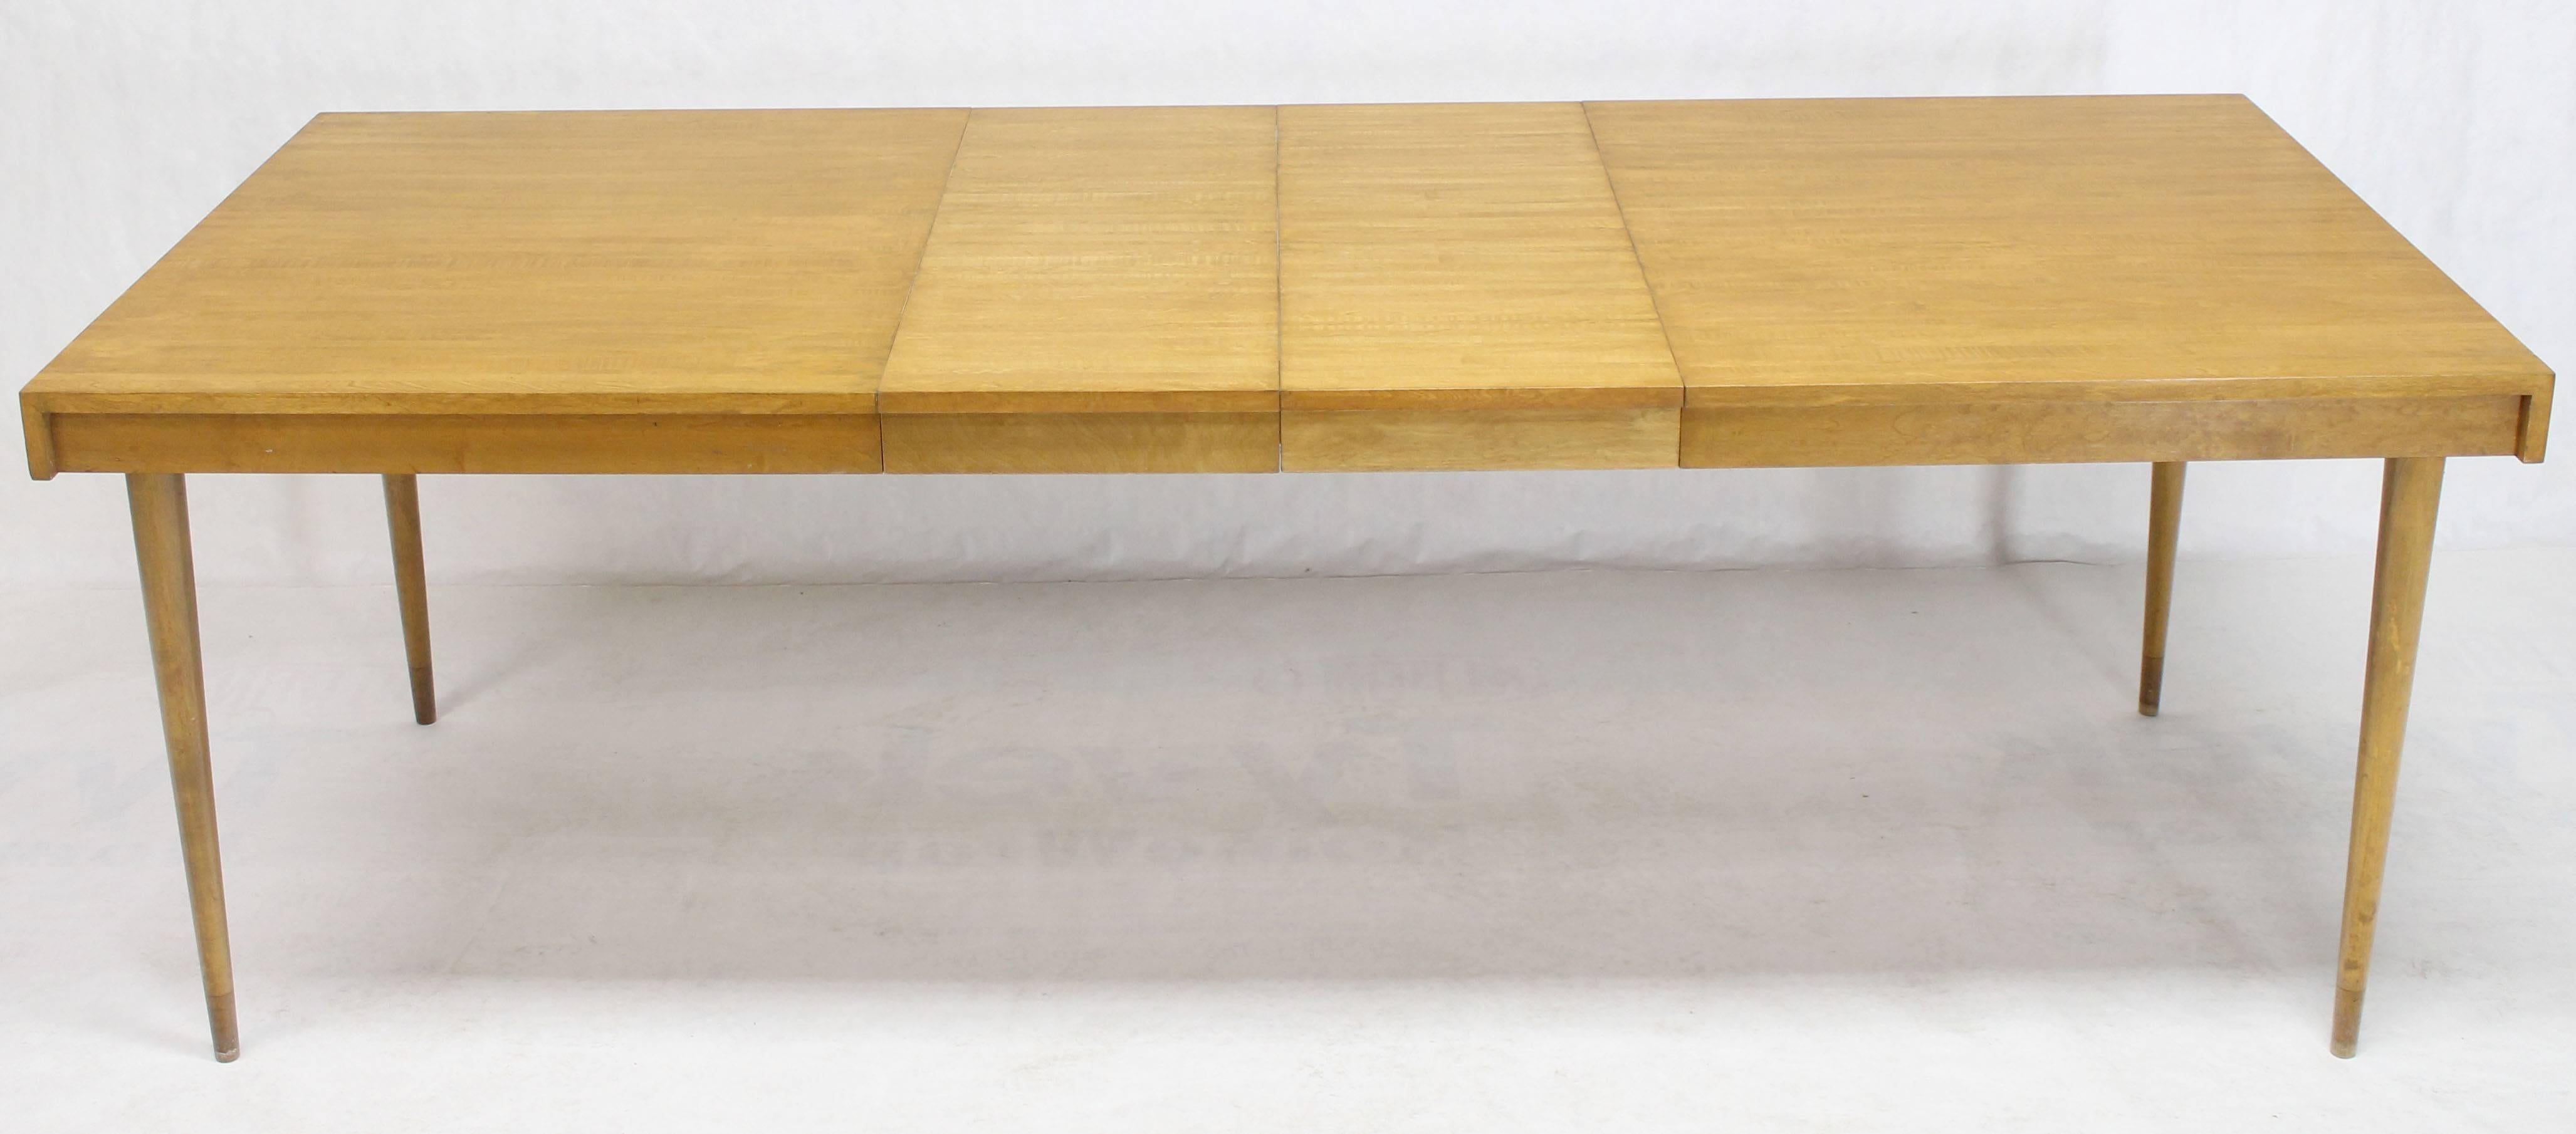 20th Century Swedish Blond Birch Dining Table w/ Two Extension Boards Leafs  For Sale